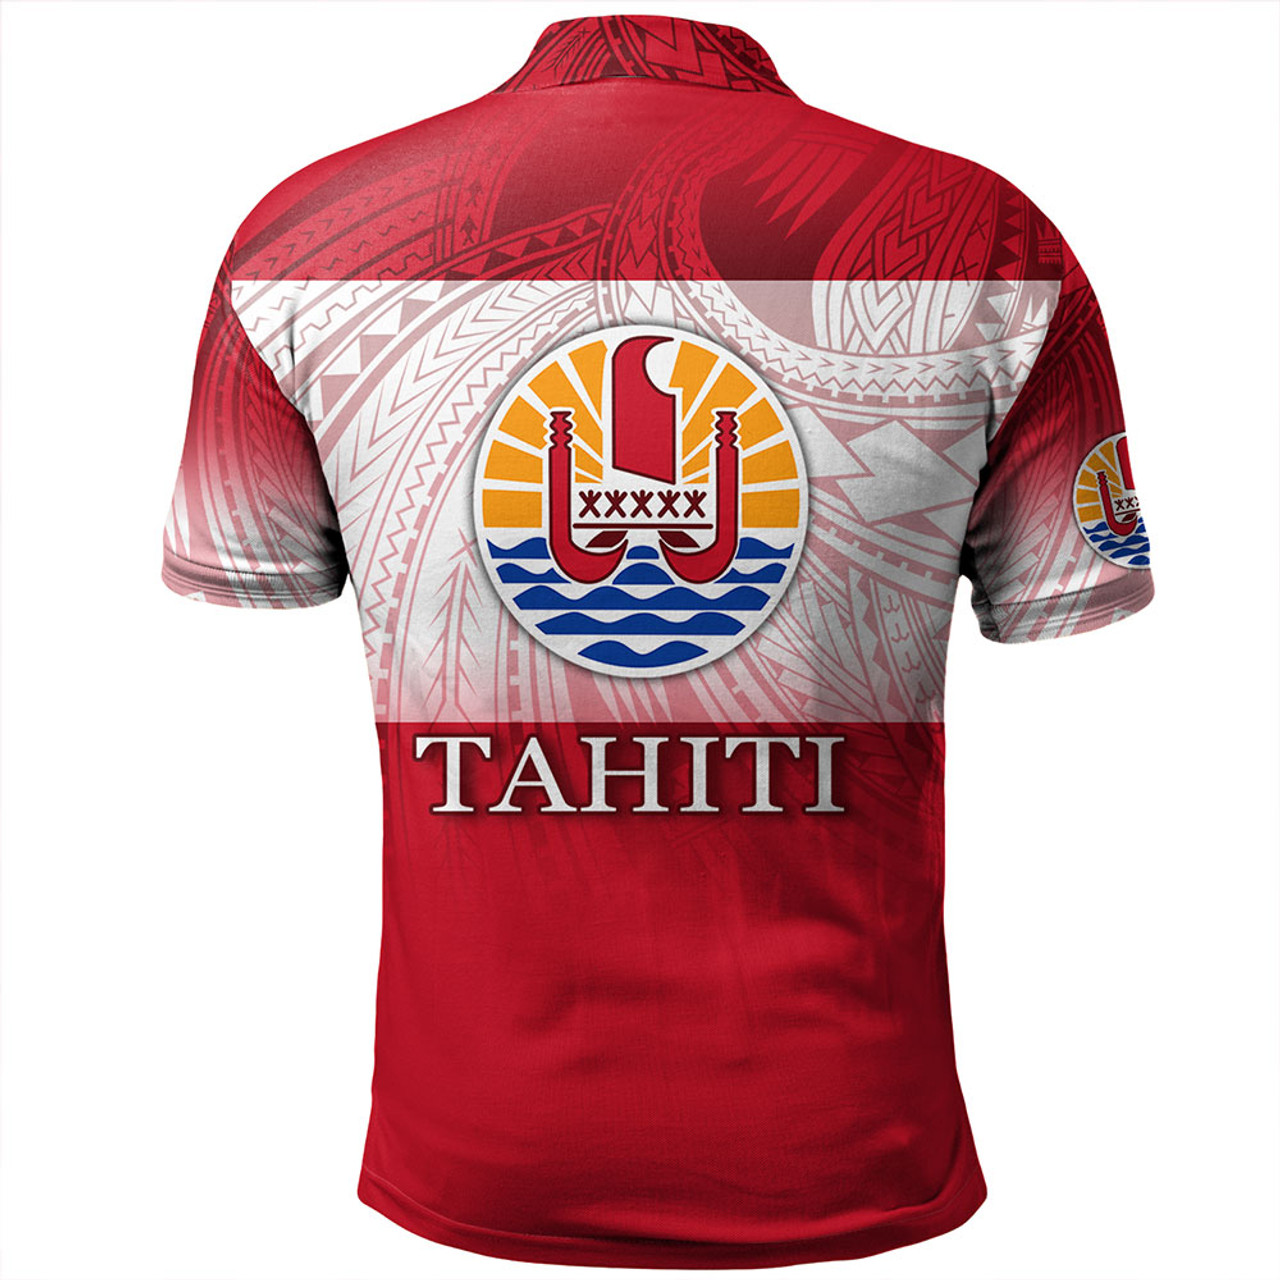 Tahiti Polo Shirt - Flag Color With Traditional Patterns